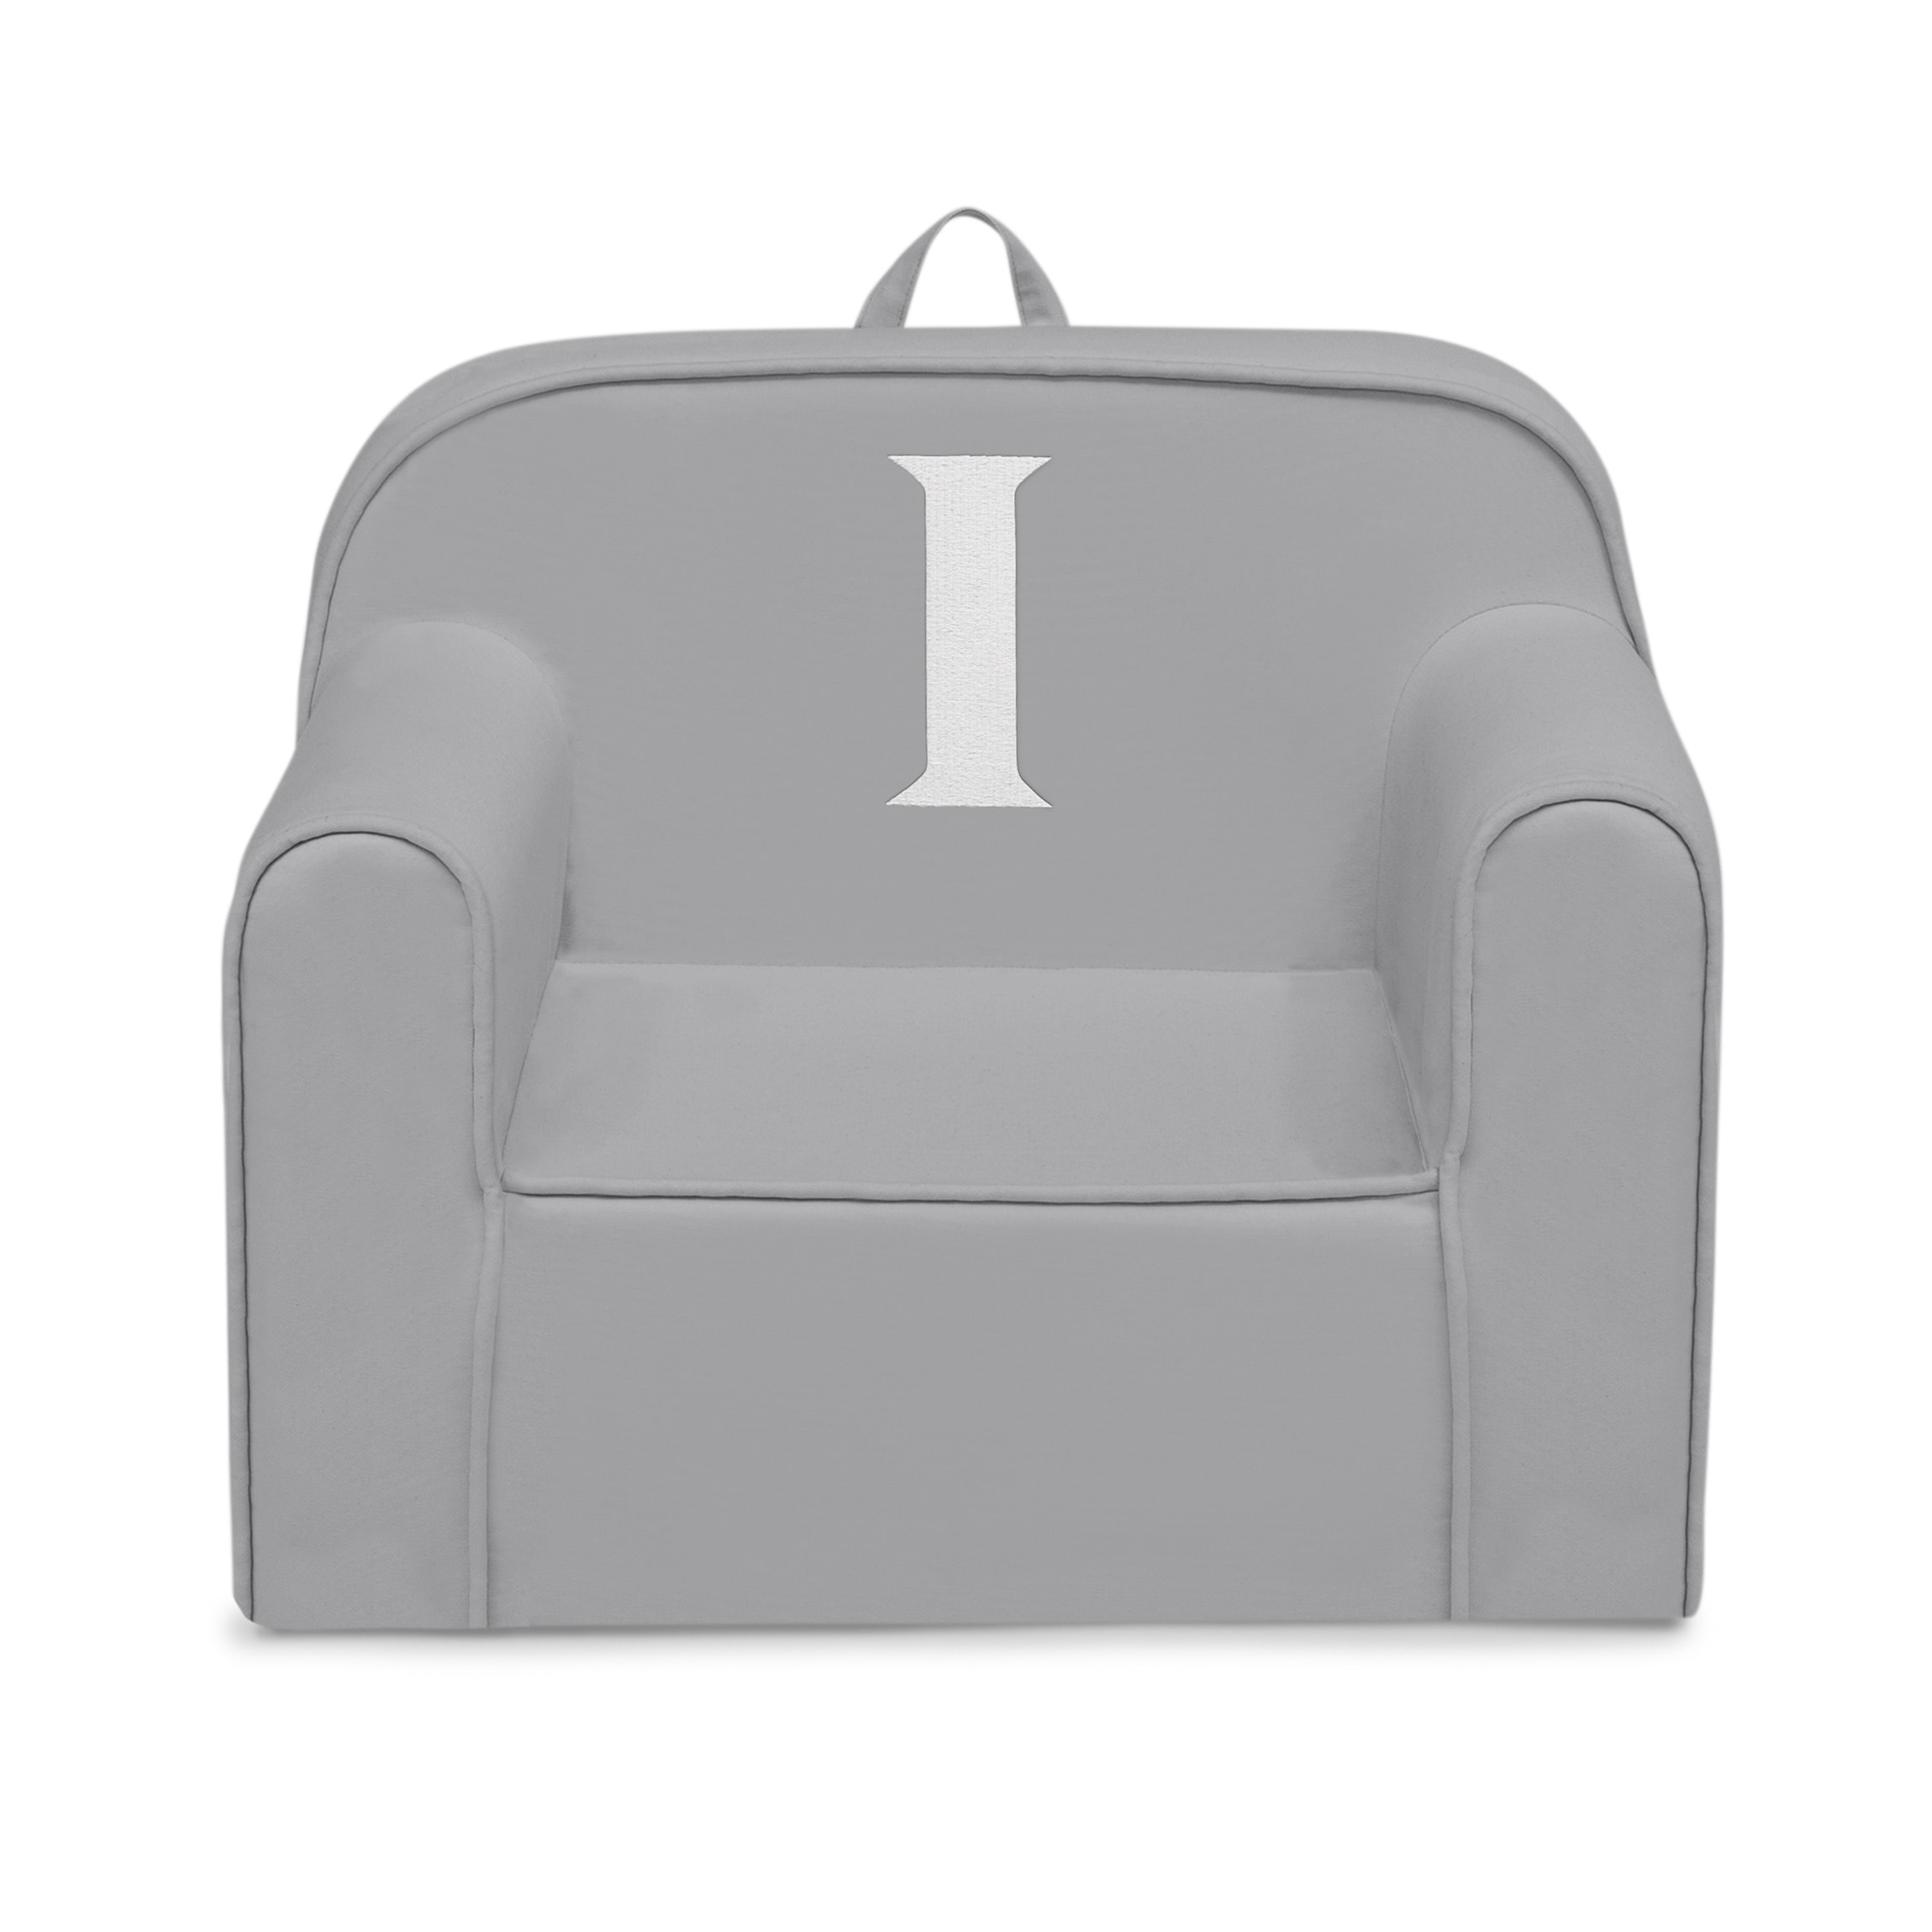 Delta Children Personalized Monogram Cozee Chair - Customize with Letter I  - Bed Bath & Beyond - 37243922